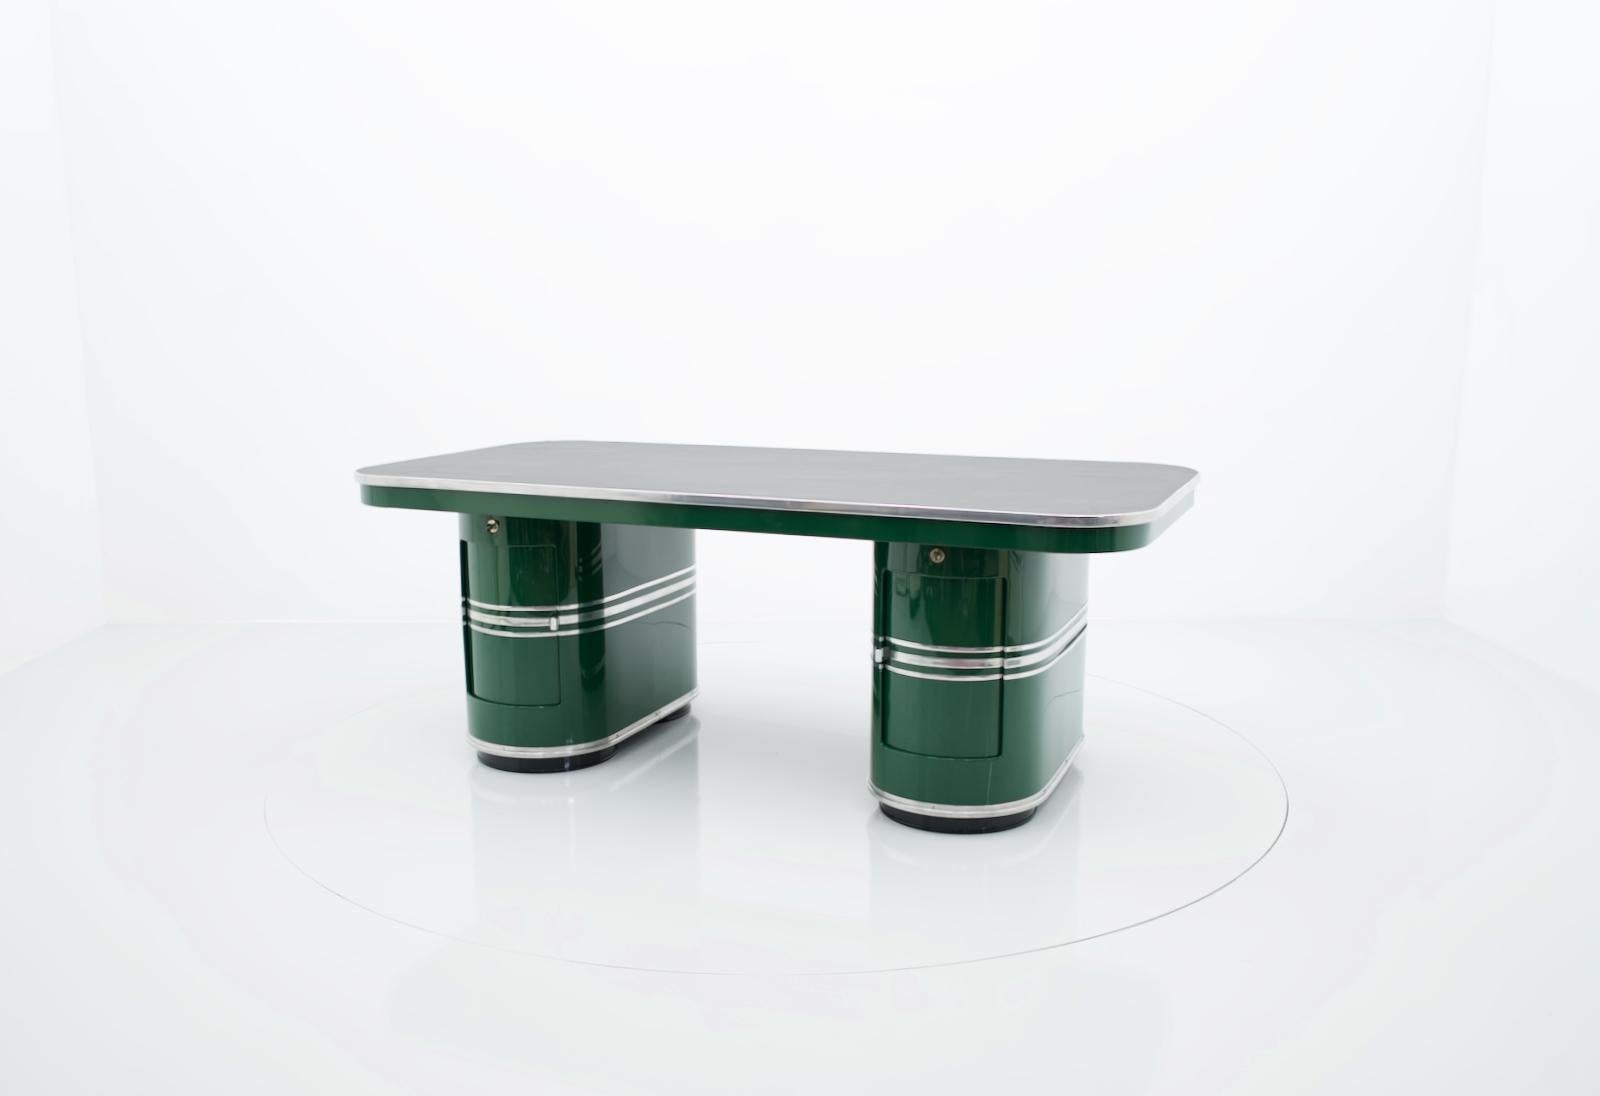 Mauser Rundform 'Berlin' Writing Desk in British Racing Green, Germany, 1950 For Sale 4